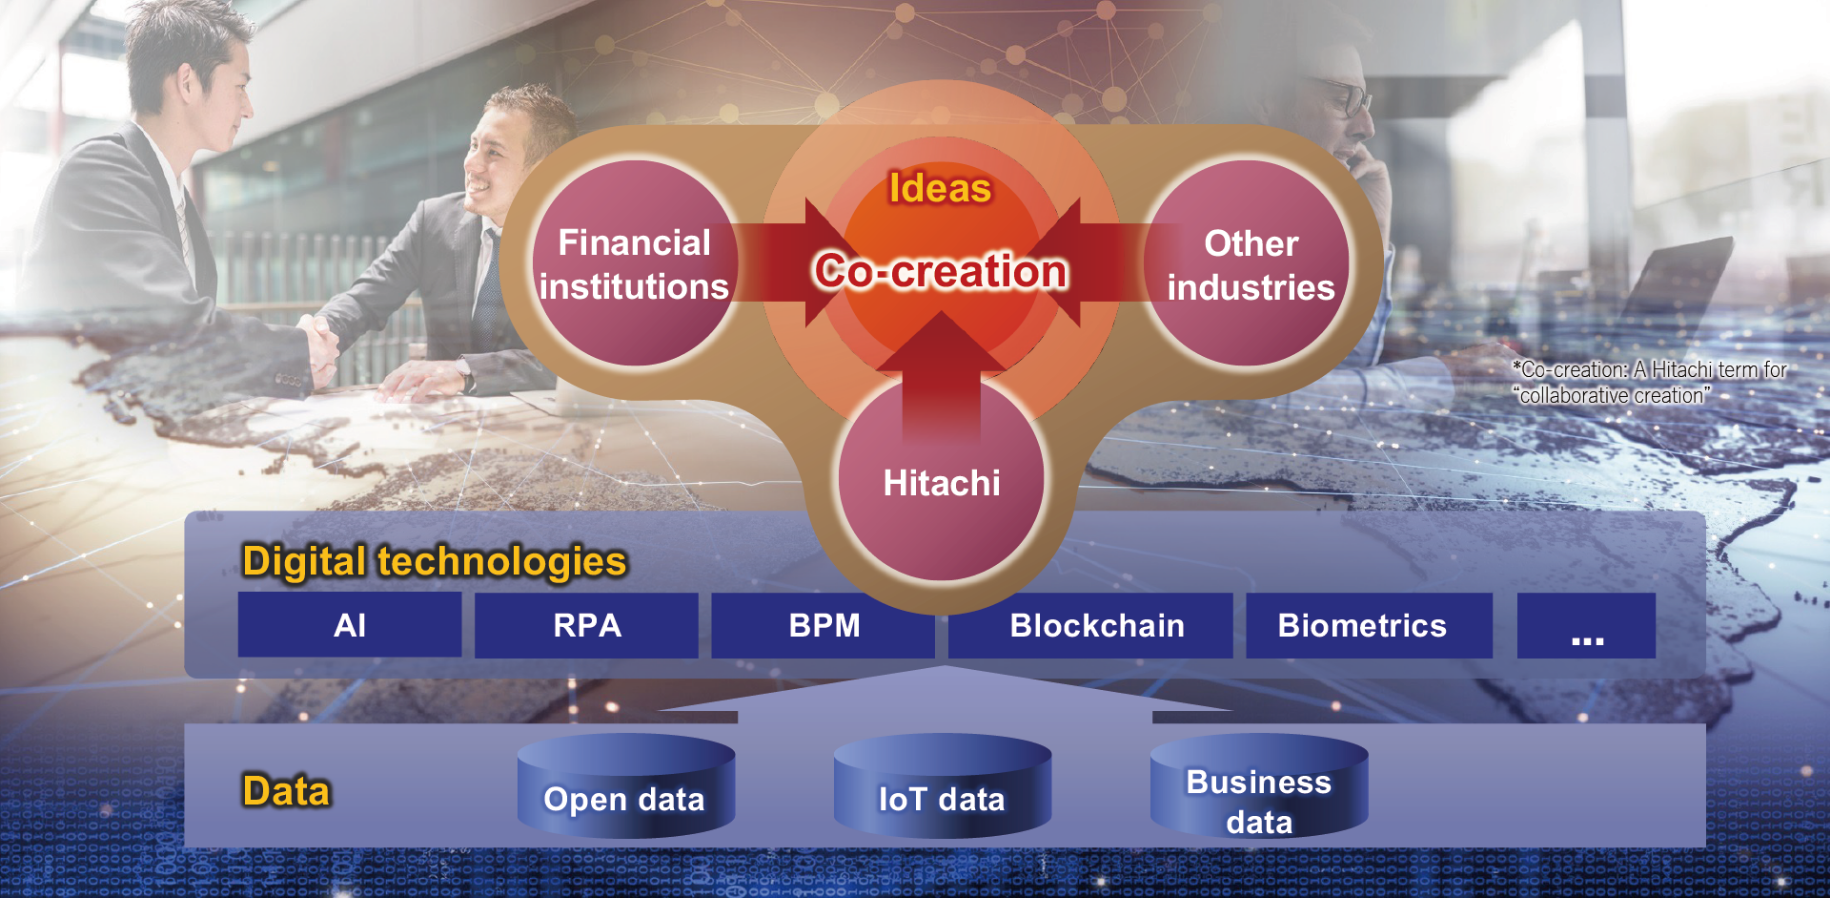 Hitachi’s financial digital solutions will utilize a wide variety of data, including business-to-business transaction data, medical big data, IoT data, and open data, as well as innovative digital technologies such as AI, blockchain, and biometric authentication technologies, to help create new financial services through collaboration among financial institutions, customers in other industries, and Hitachi’s own ideas.